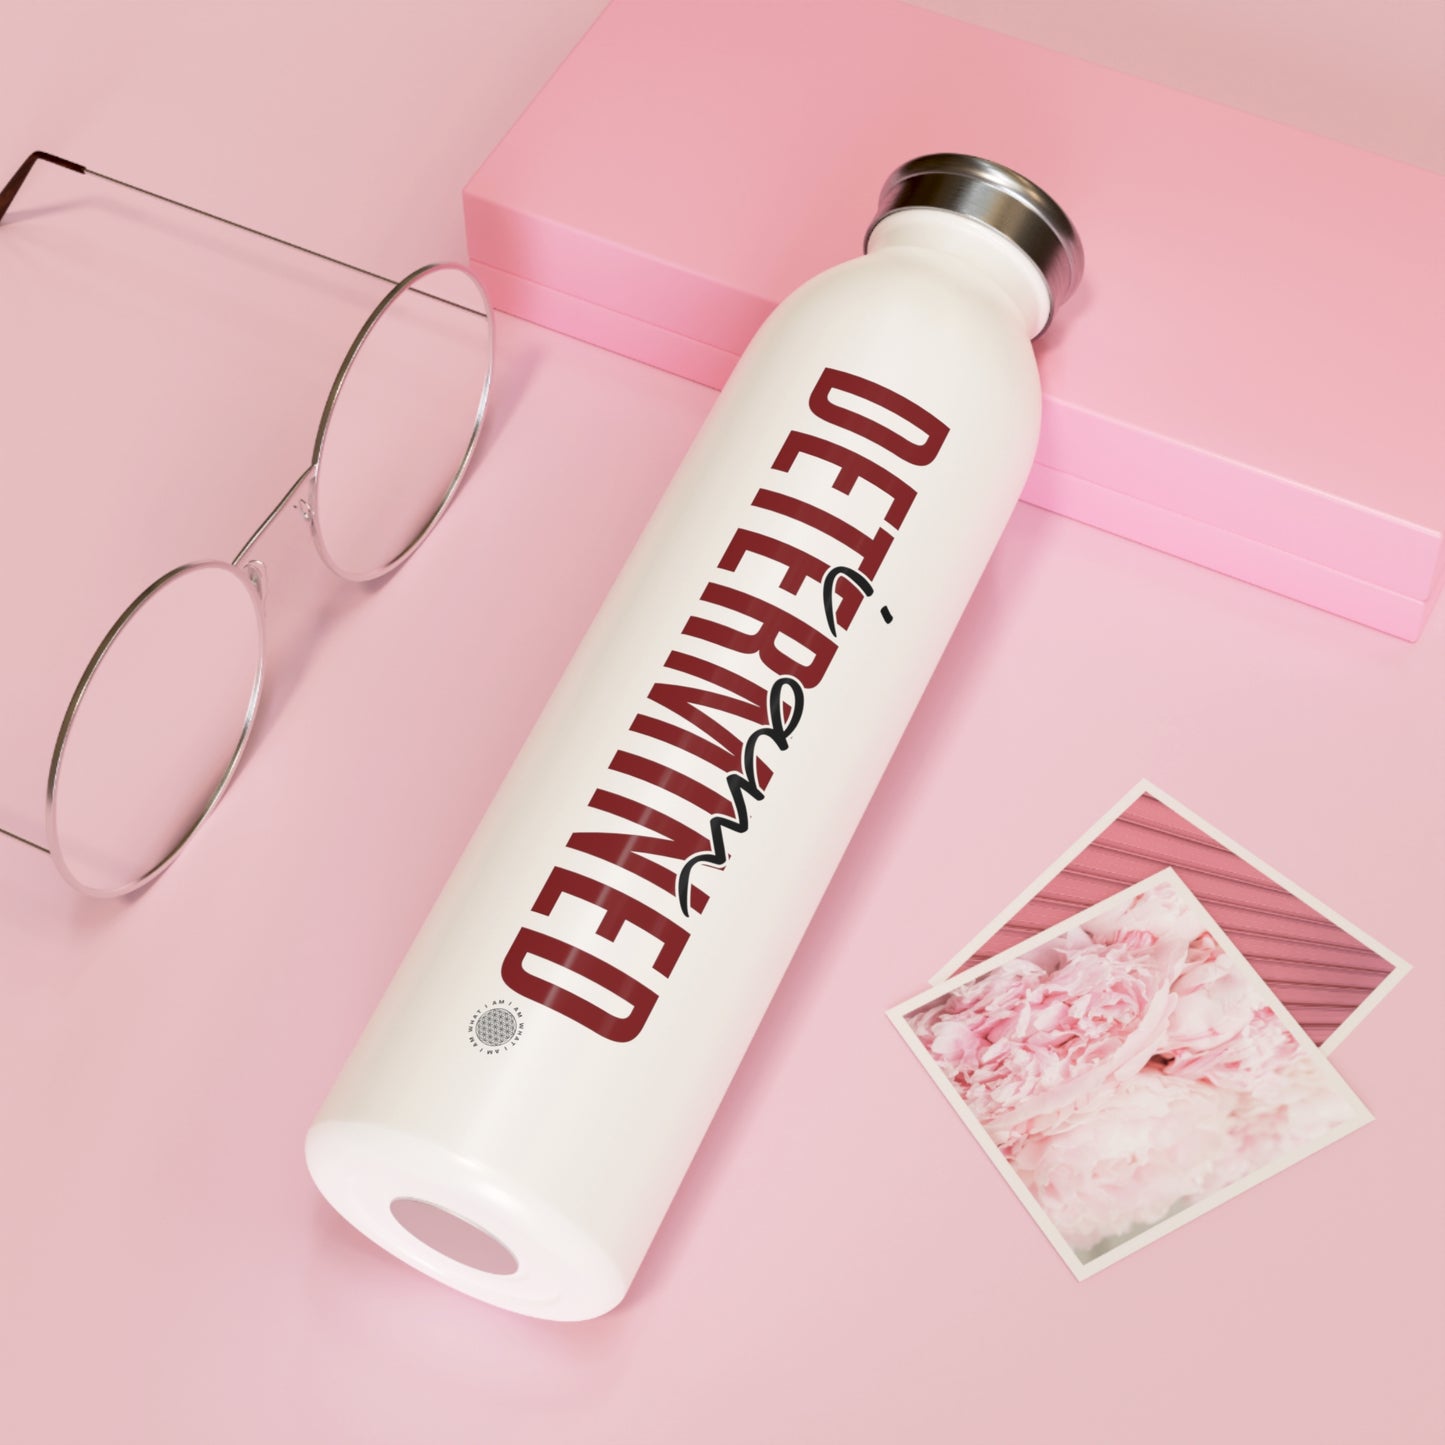 Our I Am Determined affirmation water bottle is one of our positive affirmations for mental health. Positive thinking keeps our mindset happy and healthy. This personalized water bottle was designed to become a creator’s favorite canvas of expression.